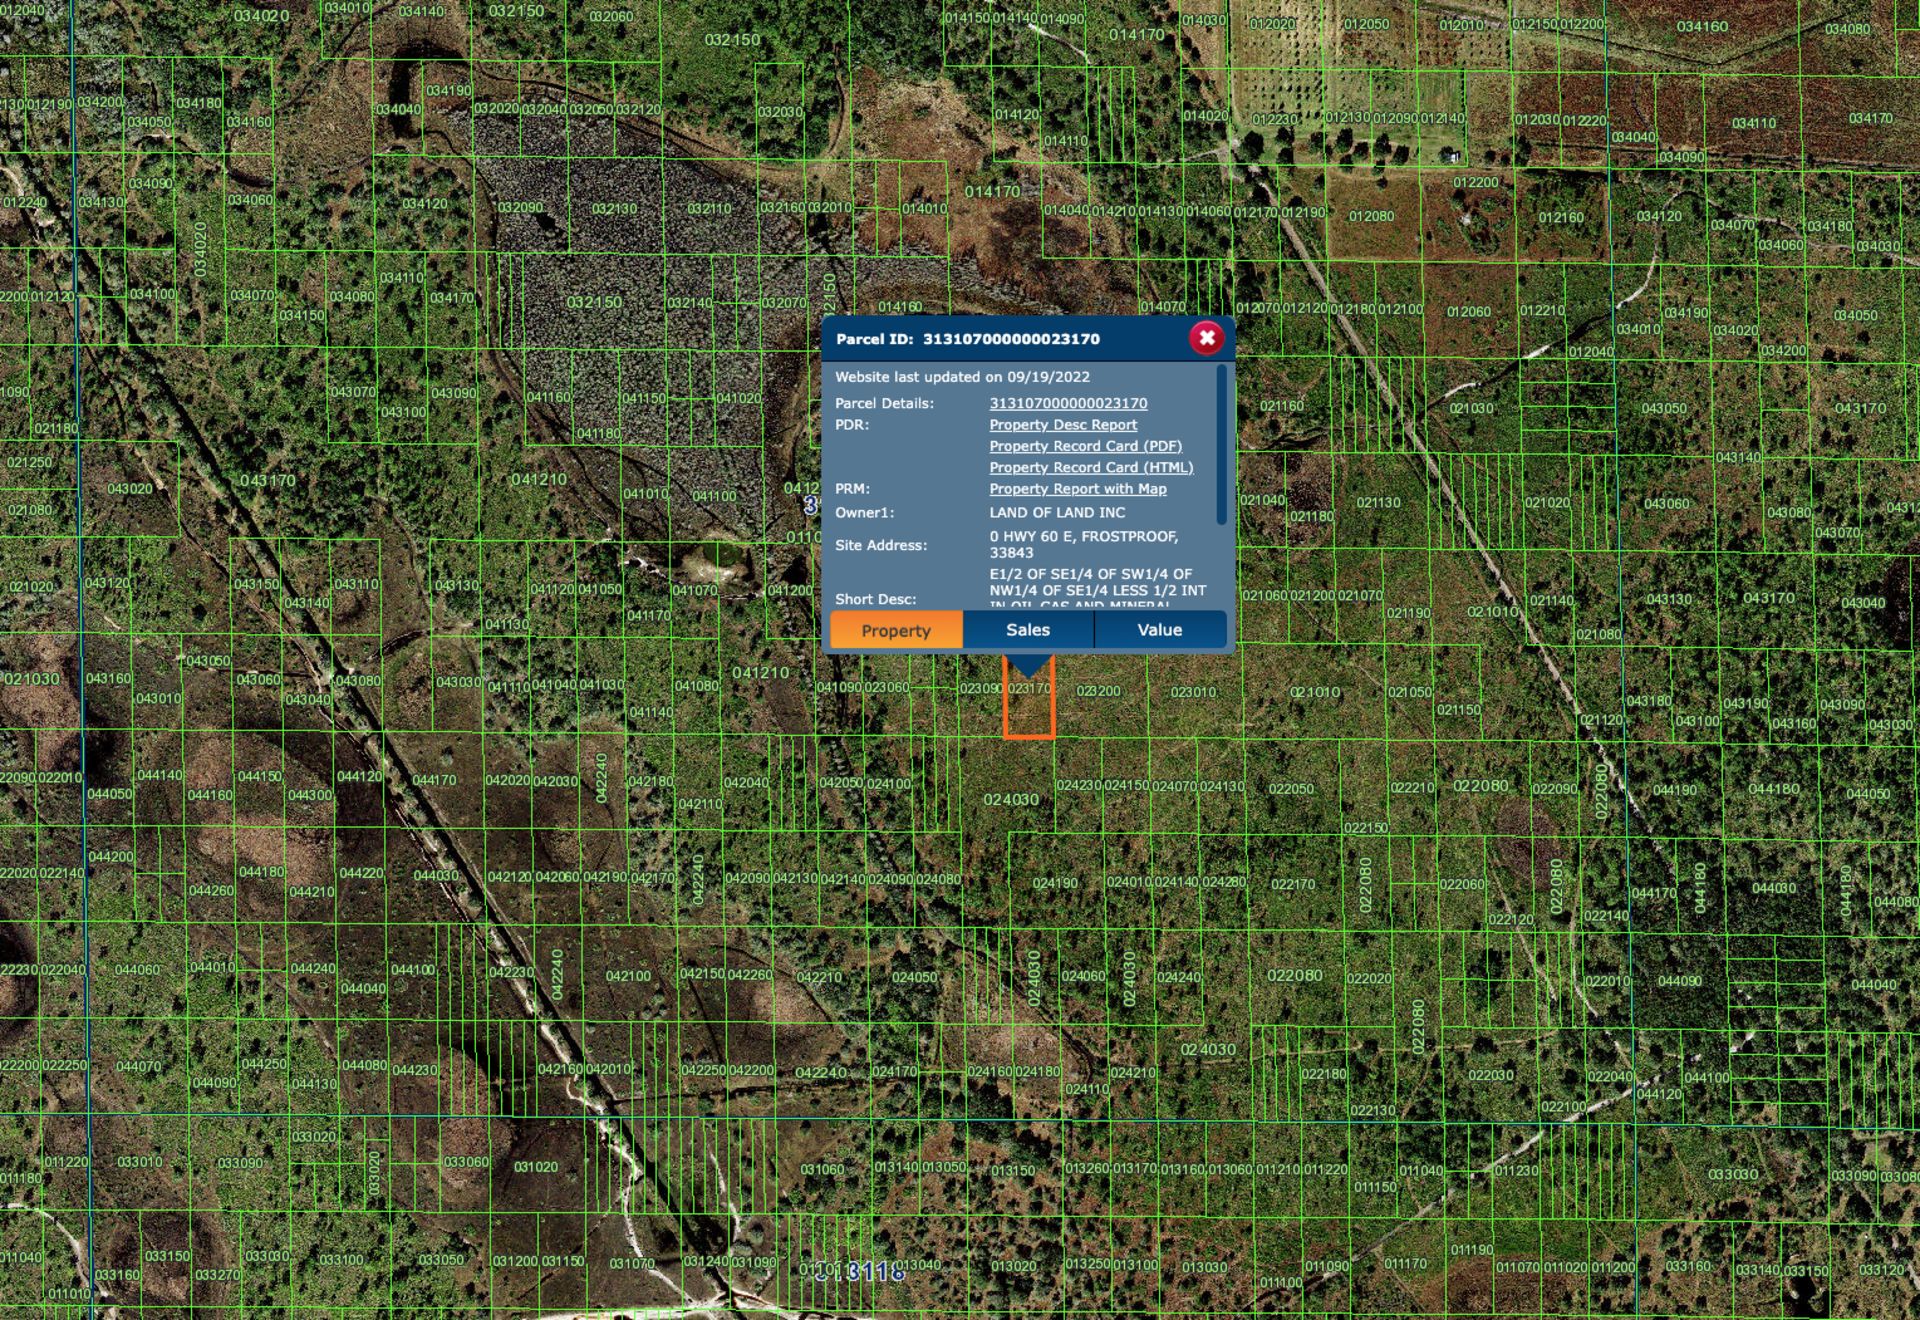 Enjoy Over an Acre in Peaceful Polk County, Florida! - Image 7 of 9